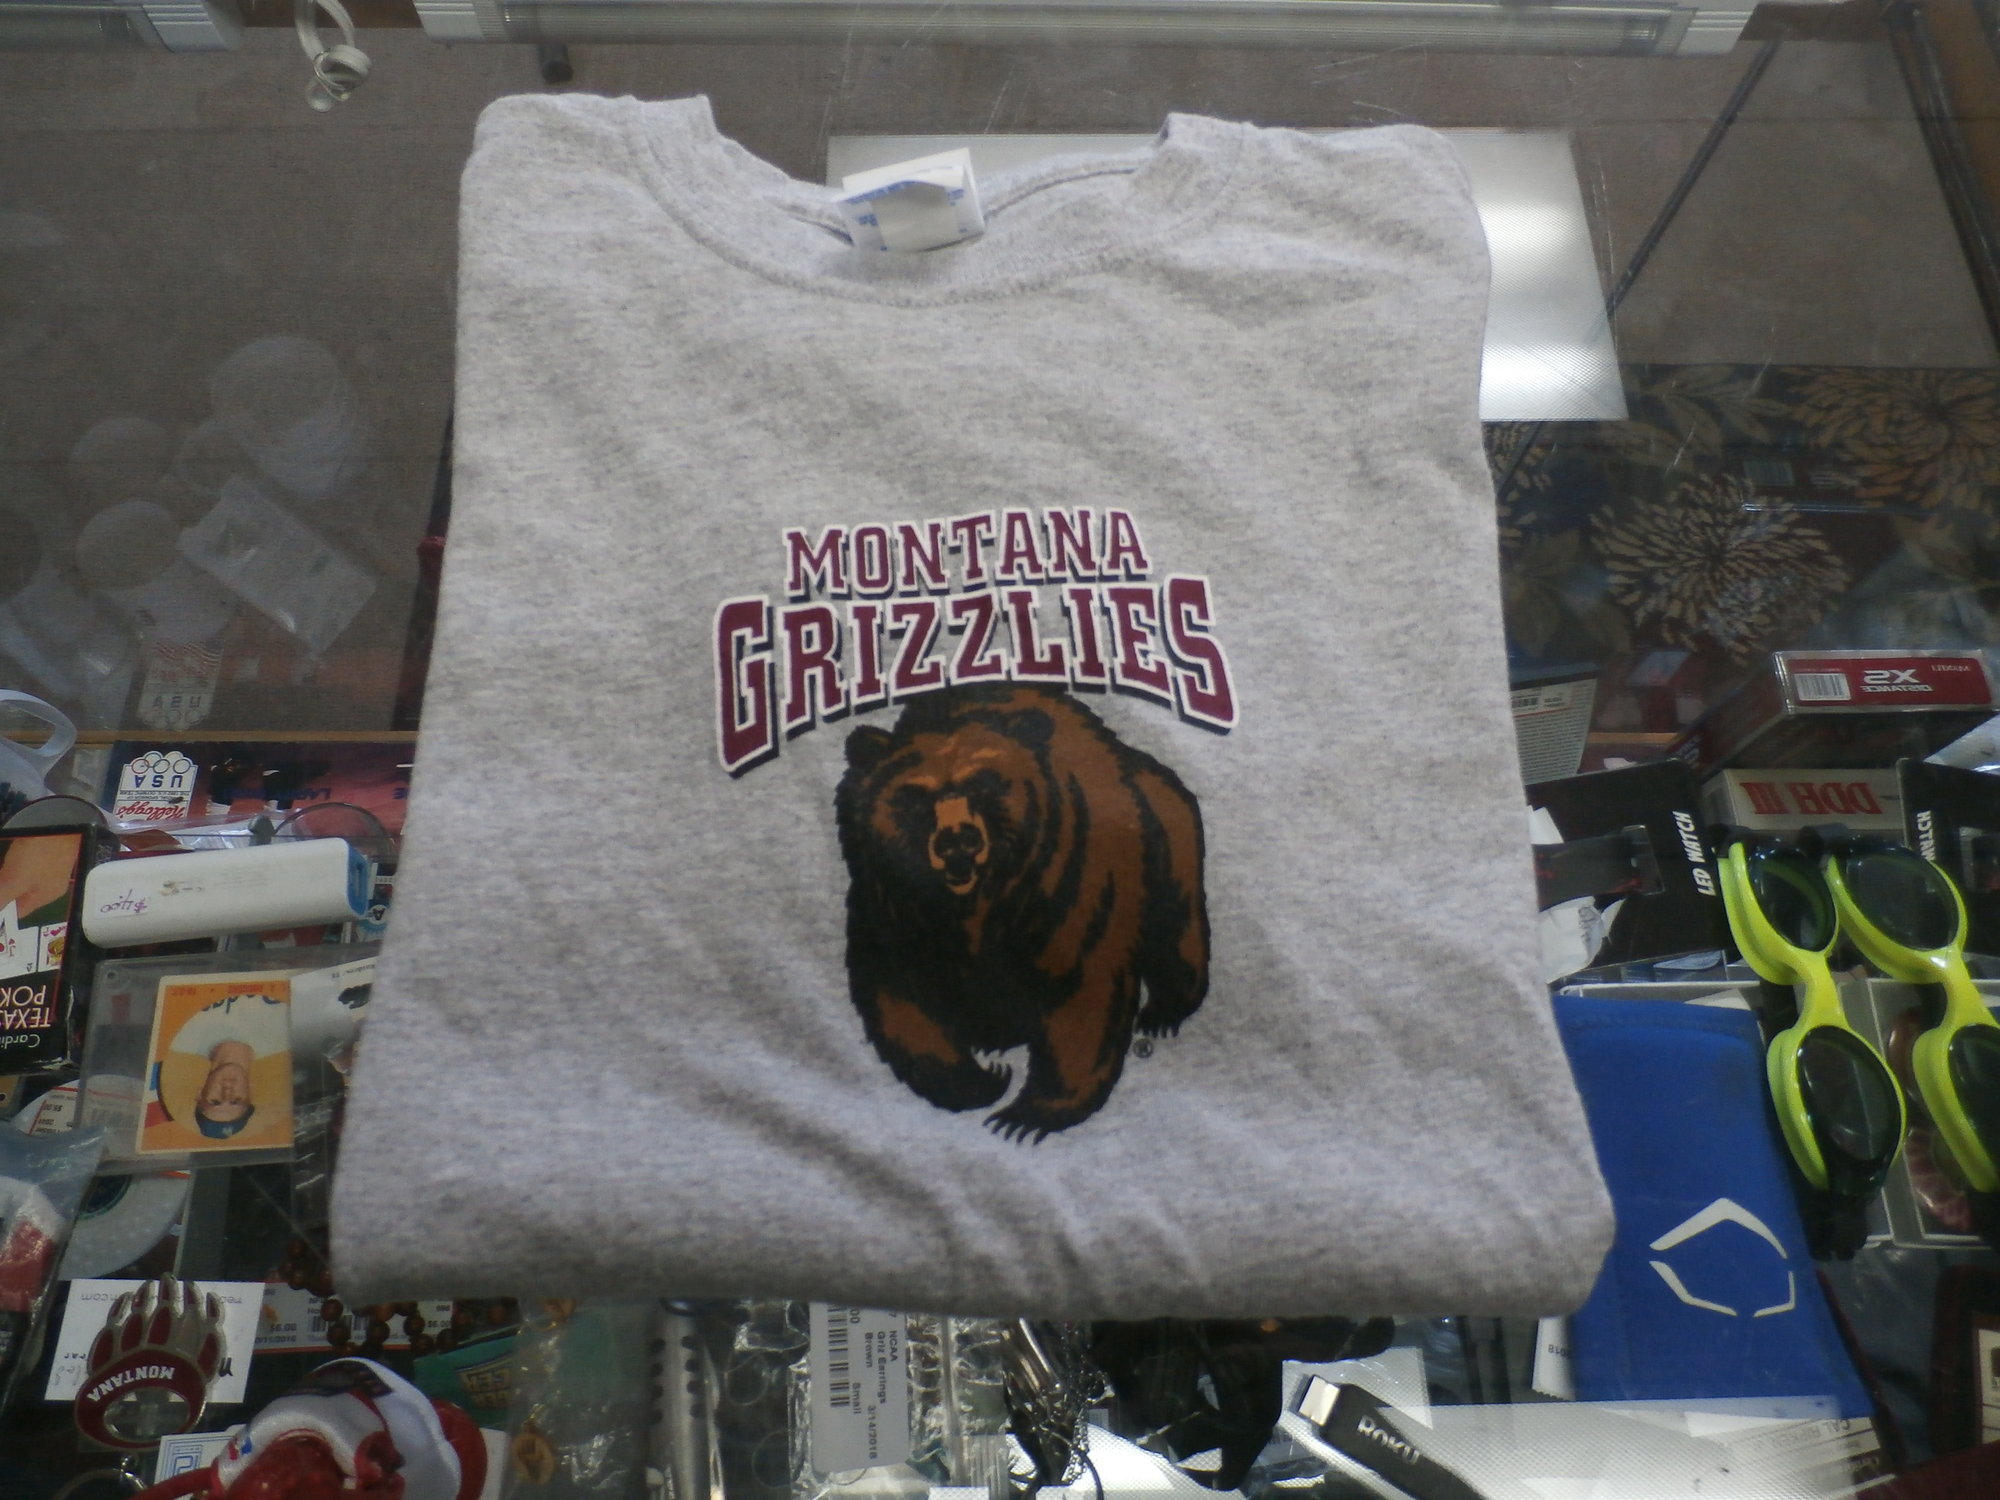 Montana Grizzlies YOUTH t shirt gray size medium Gildan cotton blend #24773
Rating: (see below) 3 - Good Condition
Team: Montana Grizzlies
Event: Logo Shirt
Brand: Gildan
Size: YOUTH- Medium  -  (measures: chest: 16\"; length: 22\")
Color: Gray
Style: short sleeve; screen pressed
Material: 90% Cotton 10% polyester;
Condition:  3 - Good Condition;  wrinkled; very minimal wearing;
Item #: 24773
Shipping: FREE